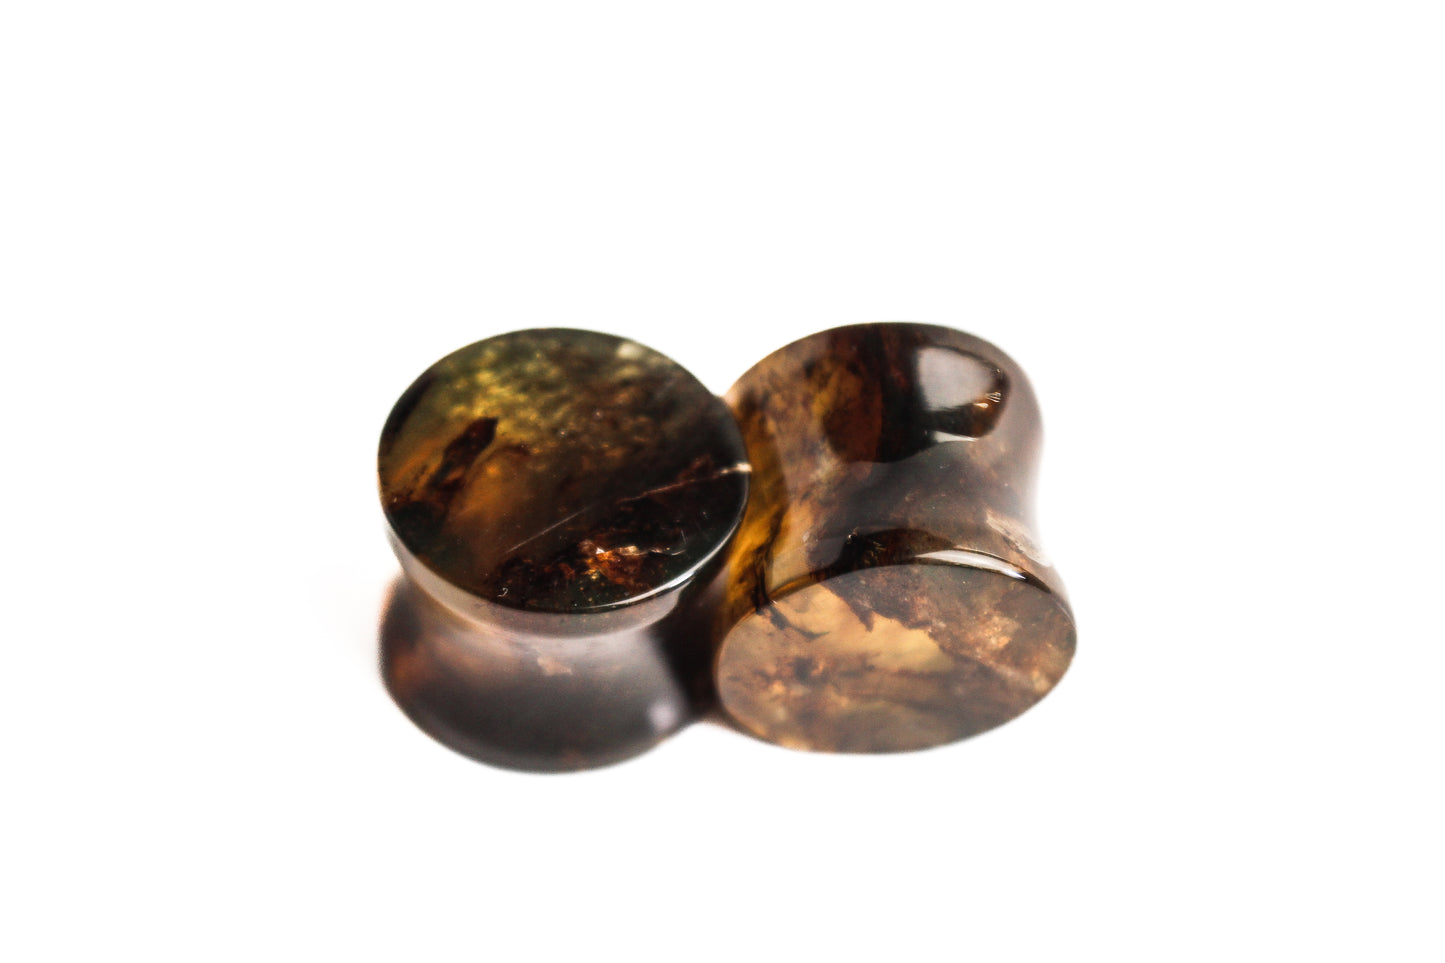 5/8" (16mm) - Chiapas Amber Double Flare Plugs